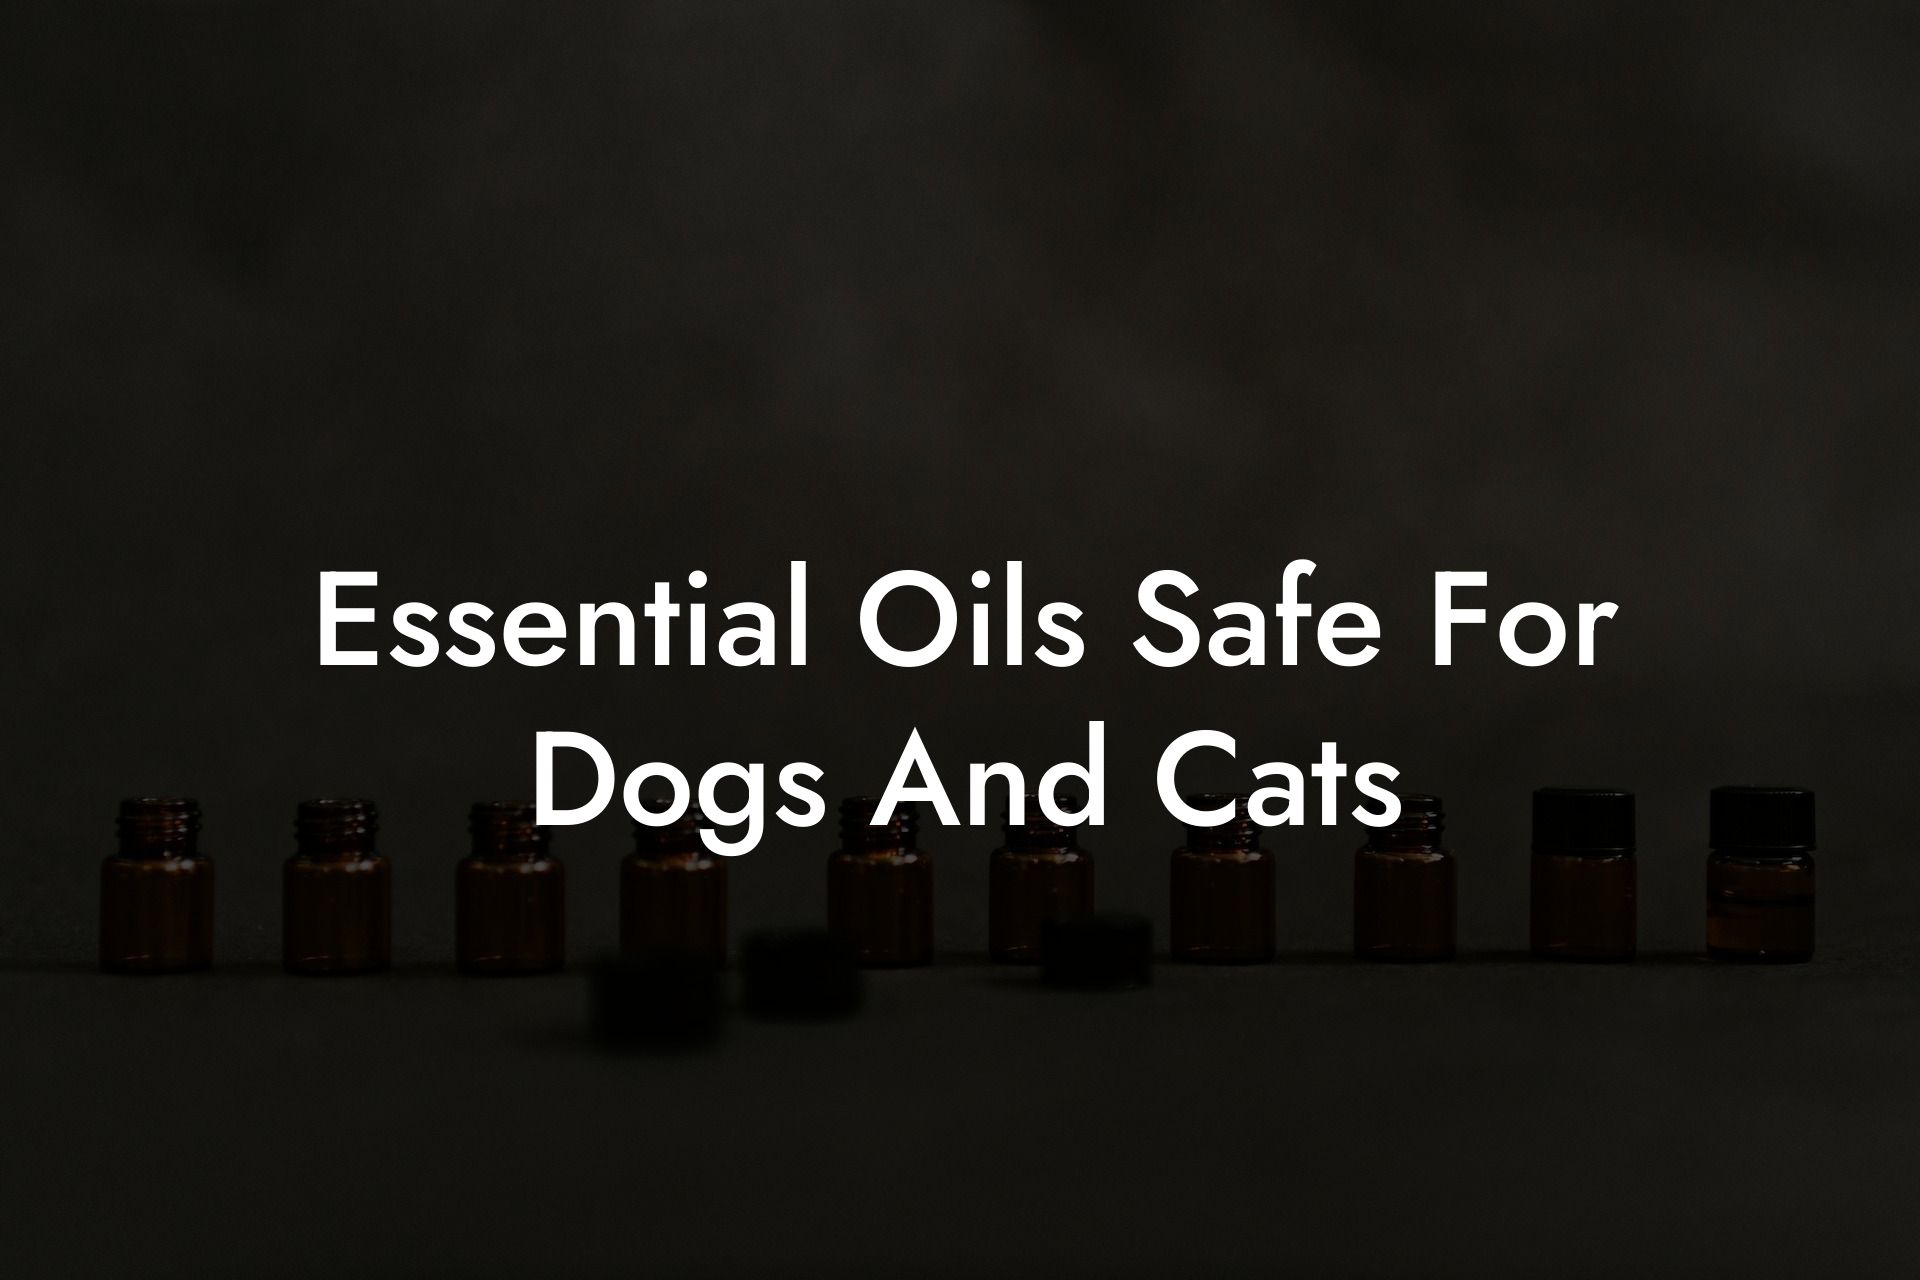 Essential Oils Safe For Dogs And Cats